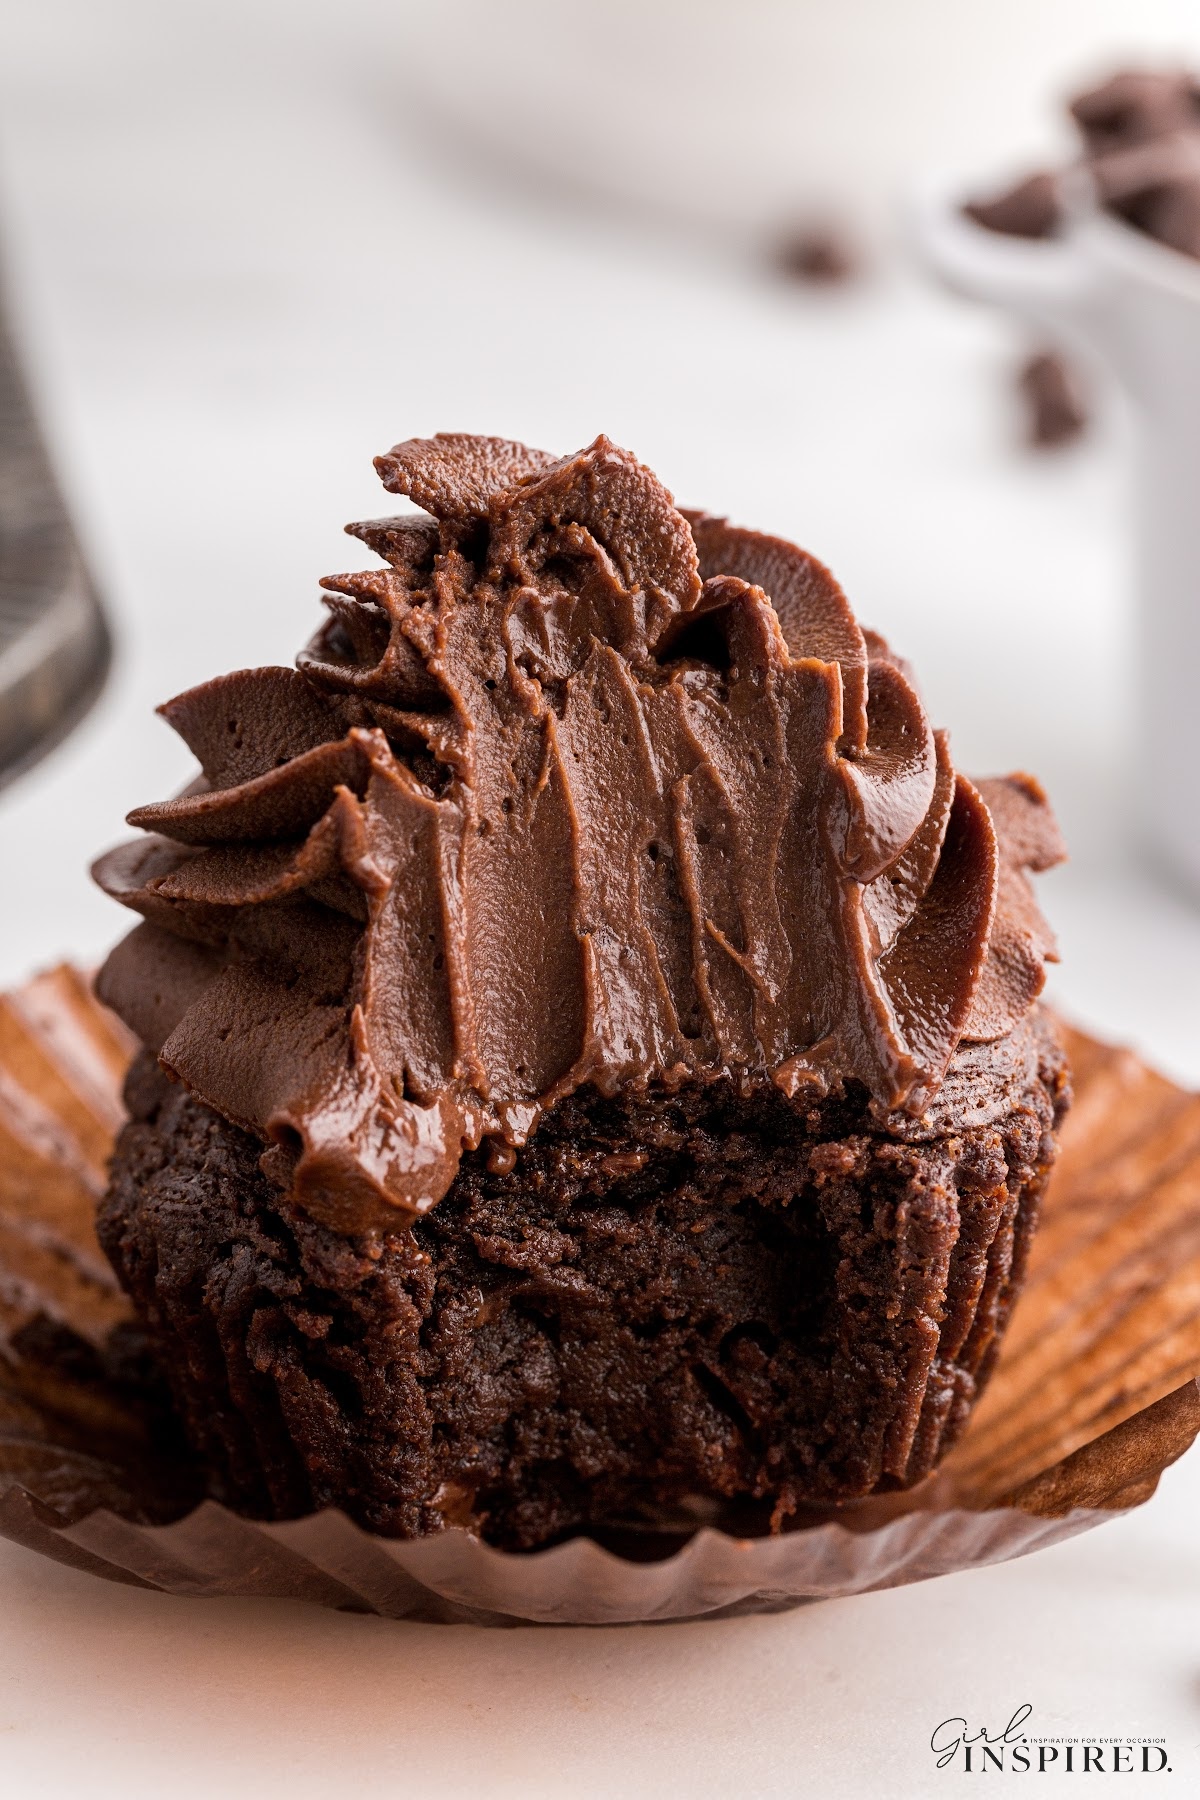 A chocolate cupcake topped with Whipped Chocolate Ganache with a bite taken from it.